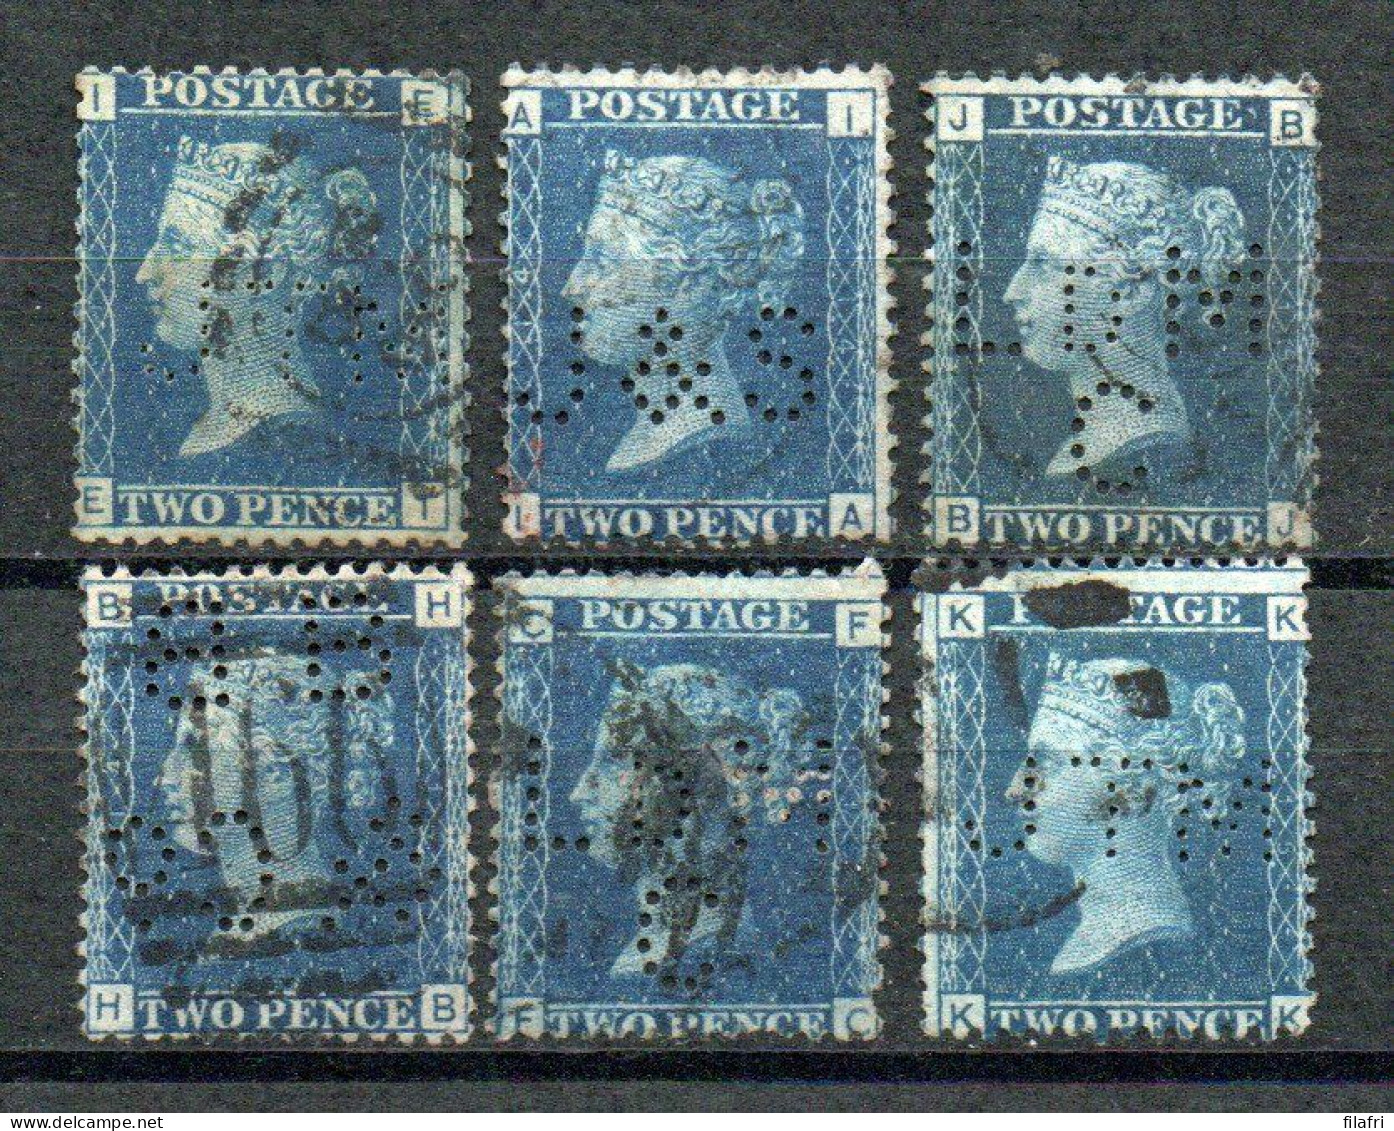 Yv 27 - 6 Perfins - Period 1840 - 1901 "Queen Victoria" : Quality Stamps (2 Scans) - Perforés